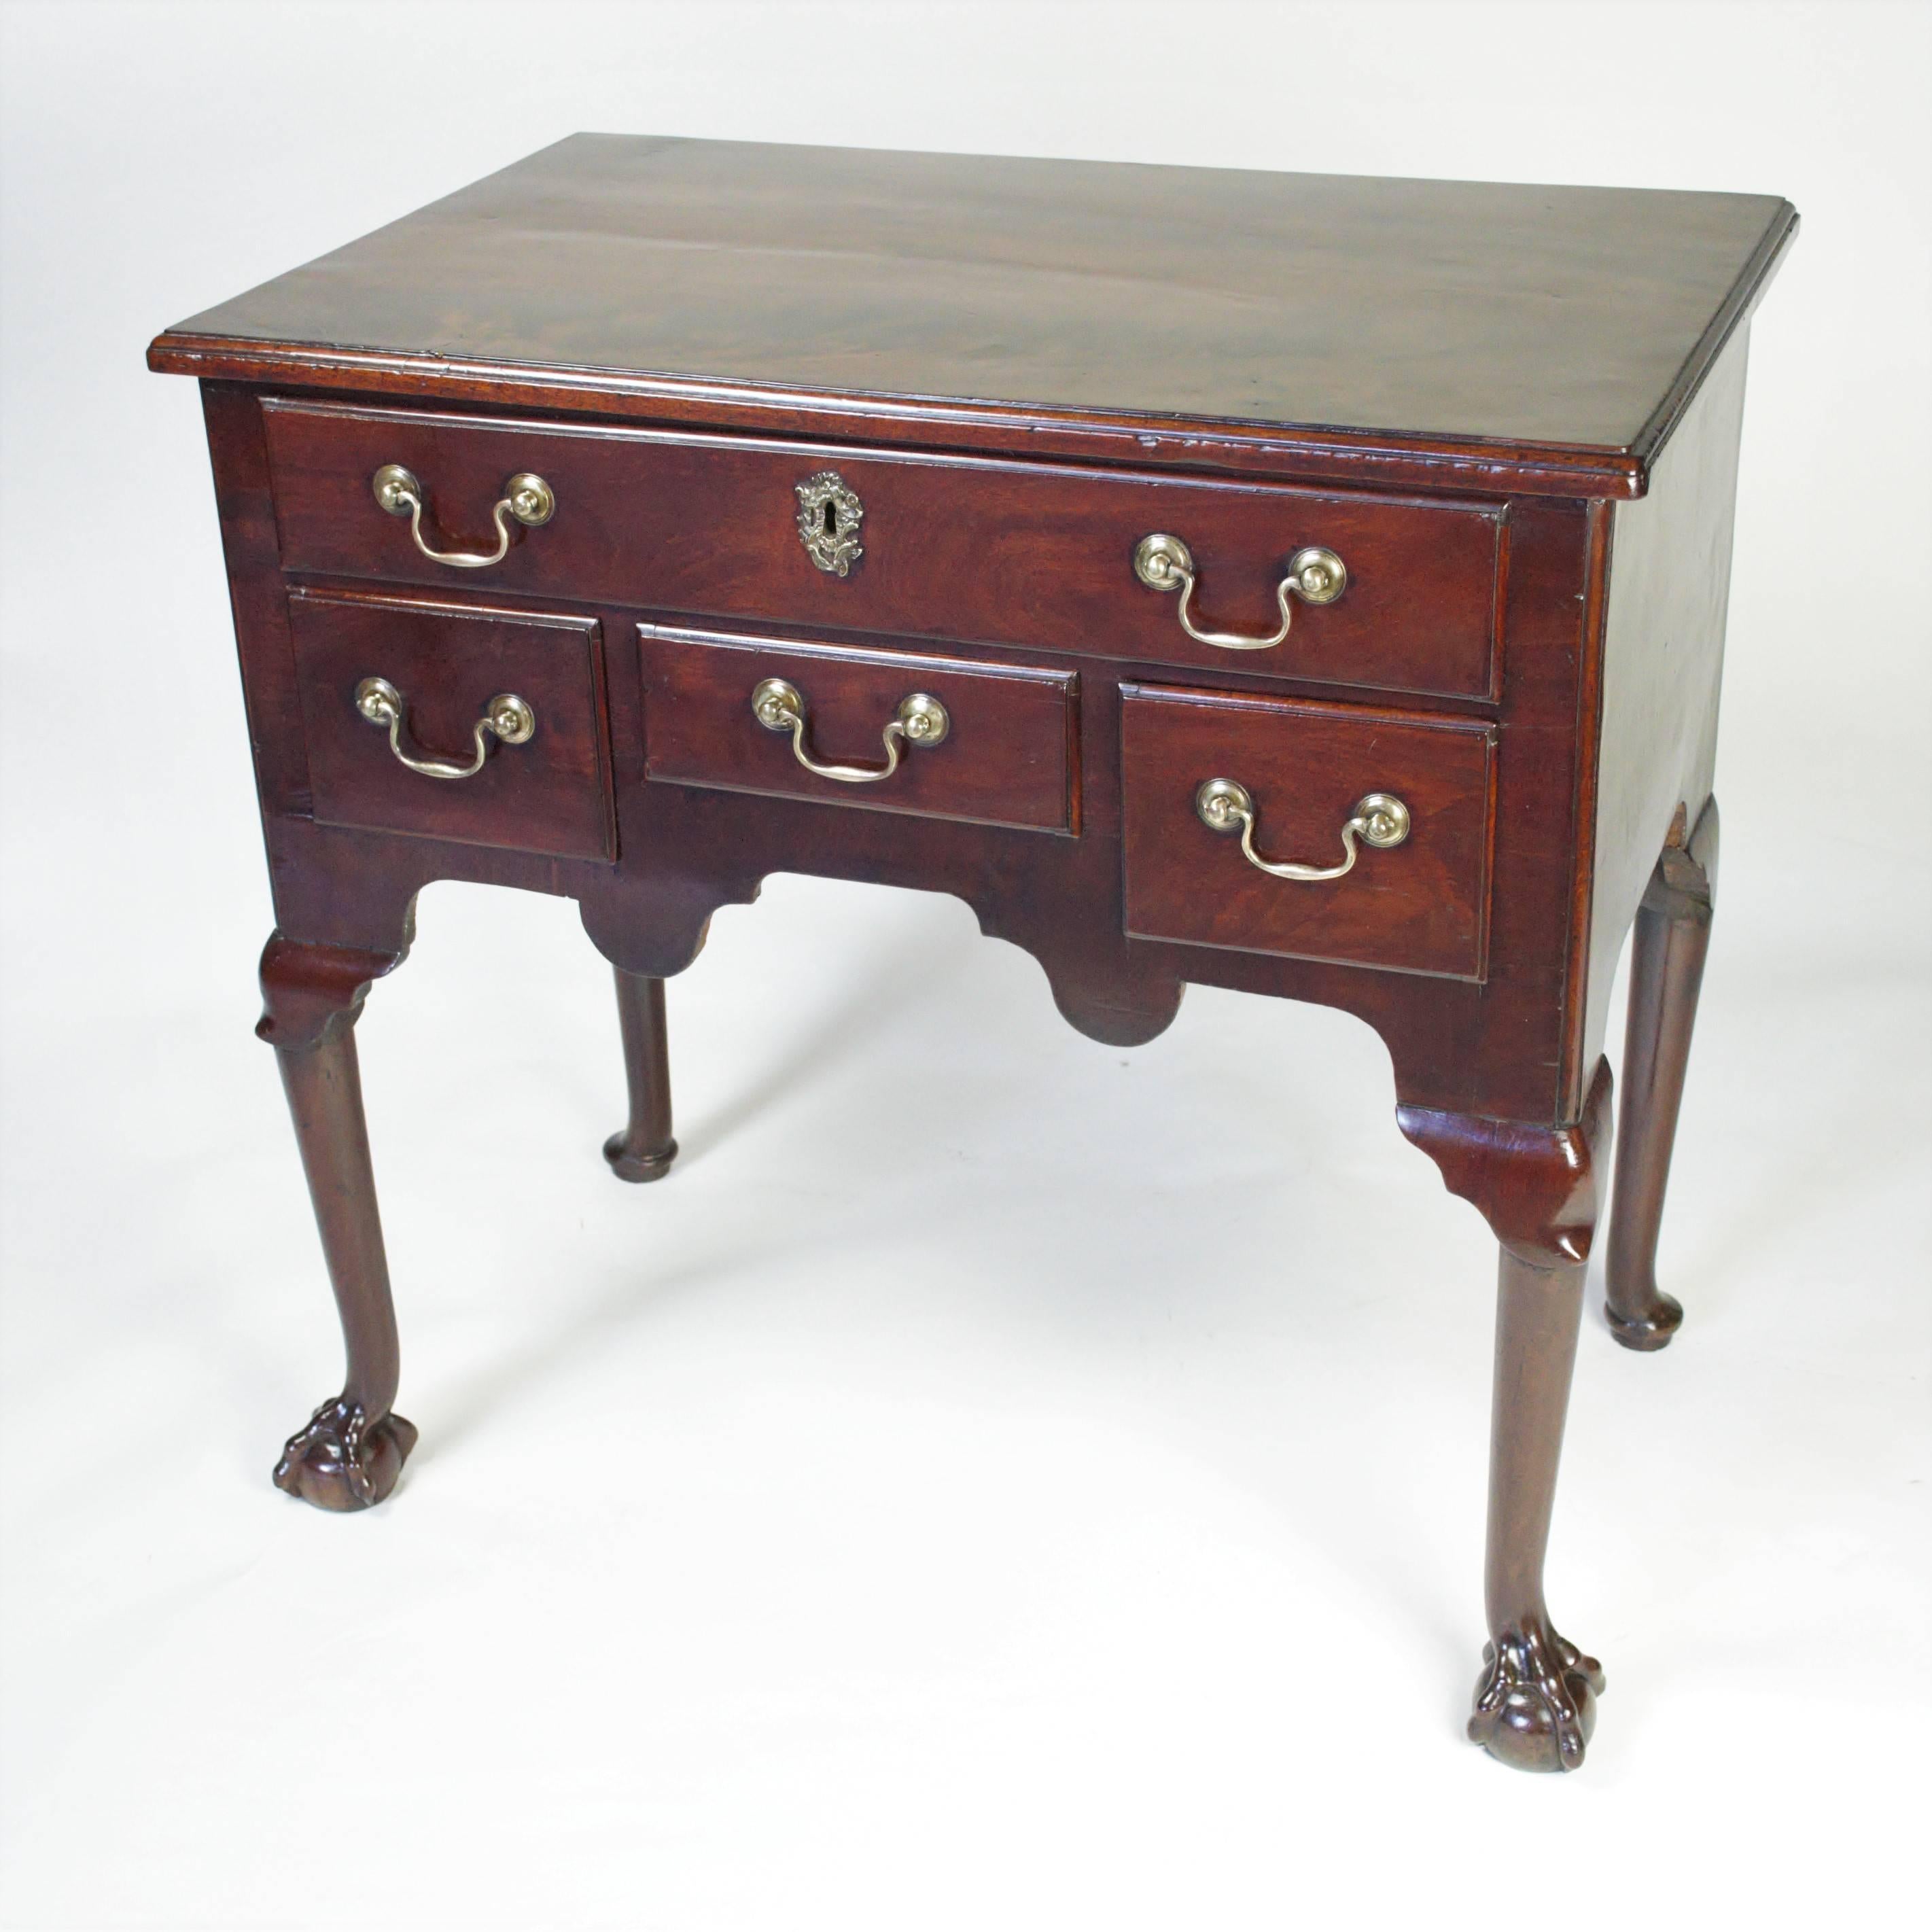 An exceptional mid-18th century mahogany lowboy with a moulded edge top above an apron fitted with one long drawer and three short drawers and raised on cabriole legs carved with lappet knees and exaggerated ball and claw feet.
Richly figured Cuban